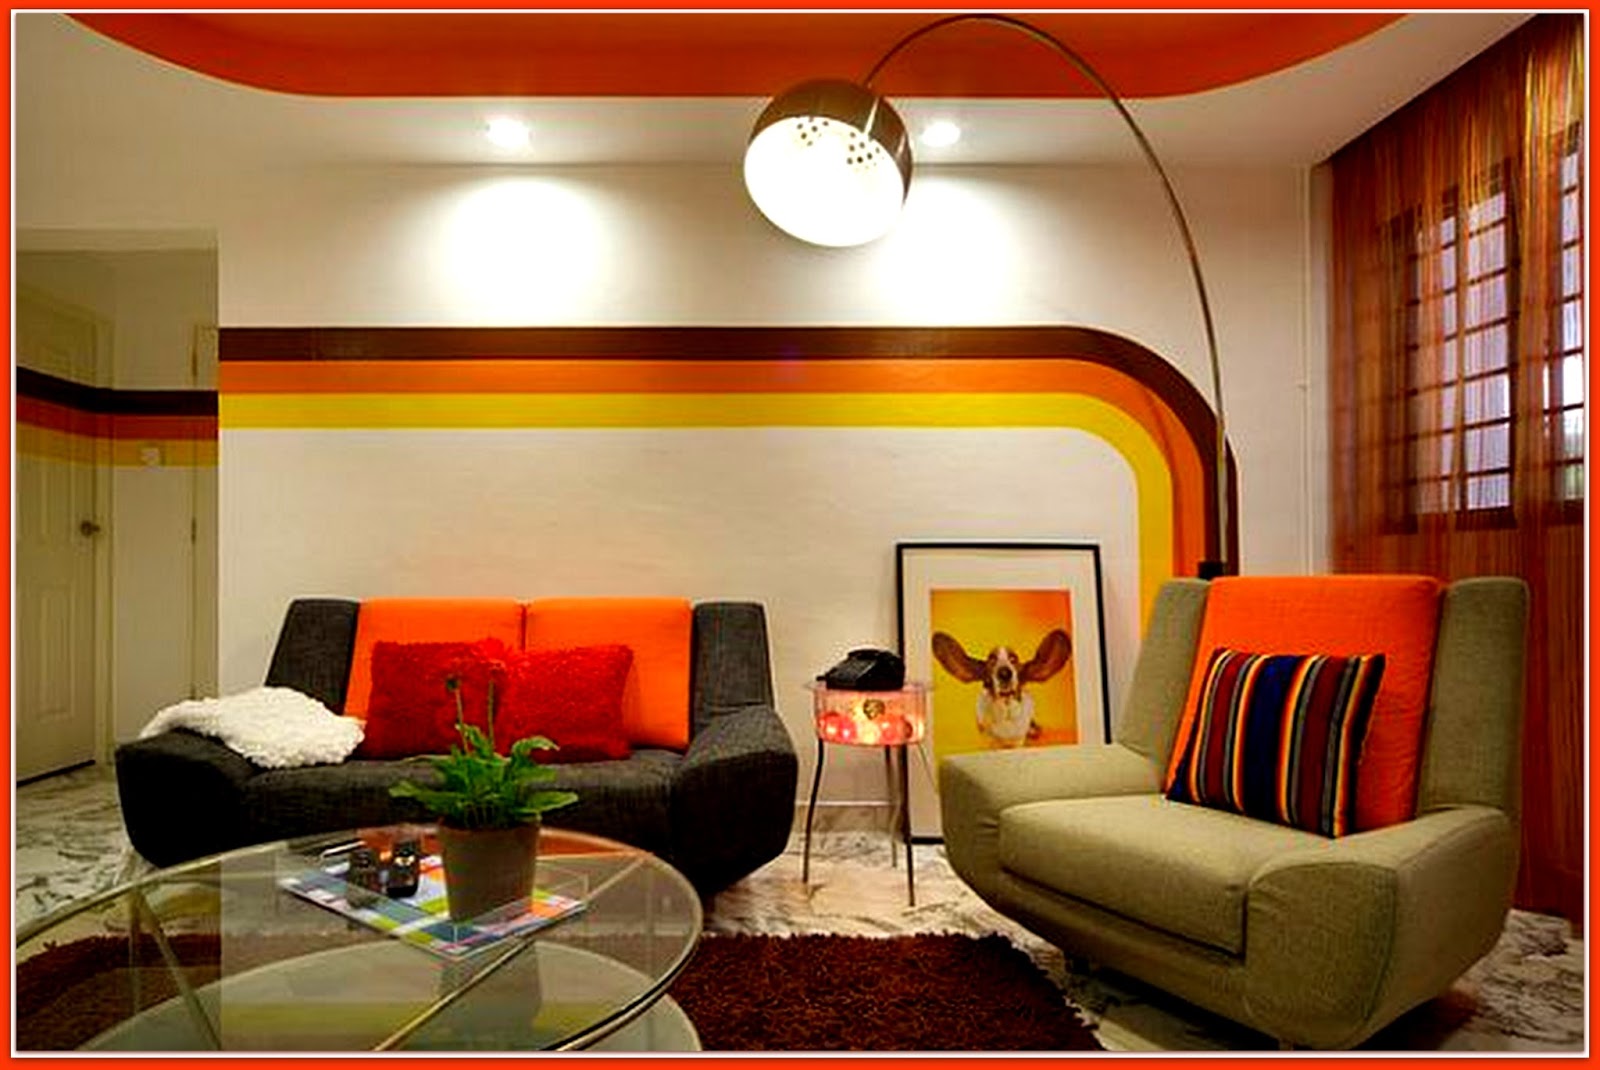 AfroChops : 60's-70's Fashion, Furniture and Furnishings